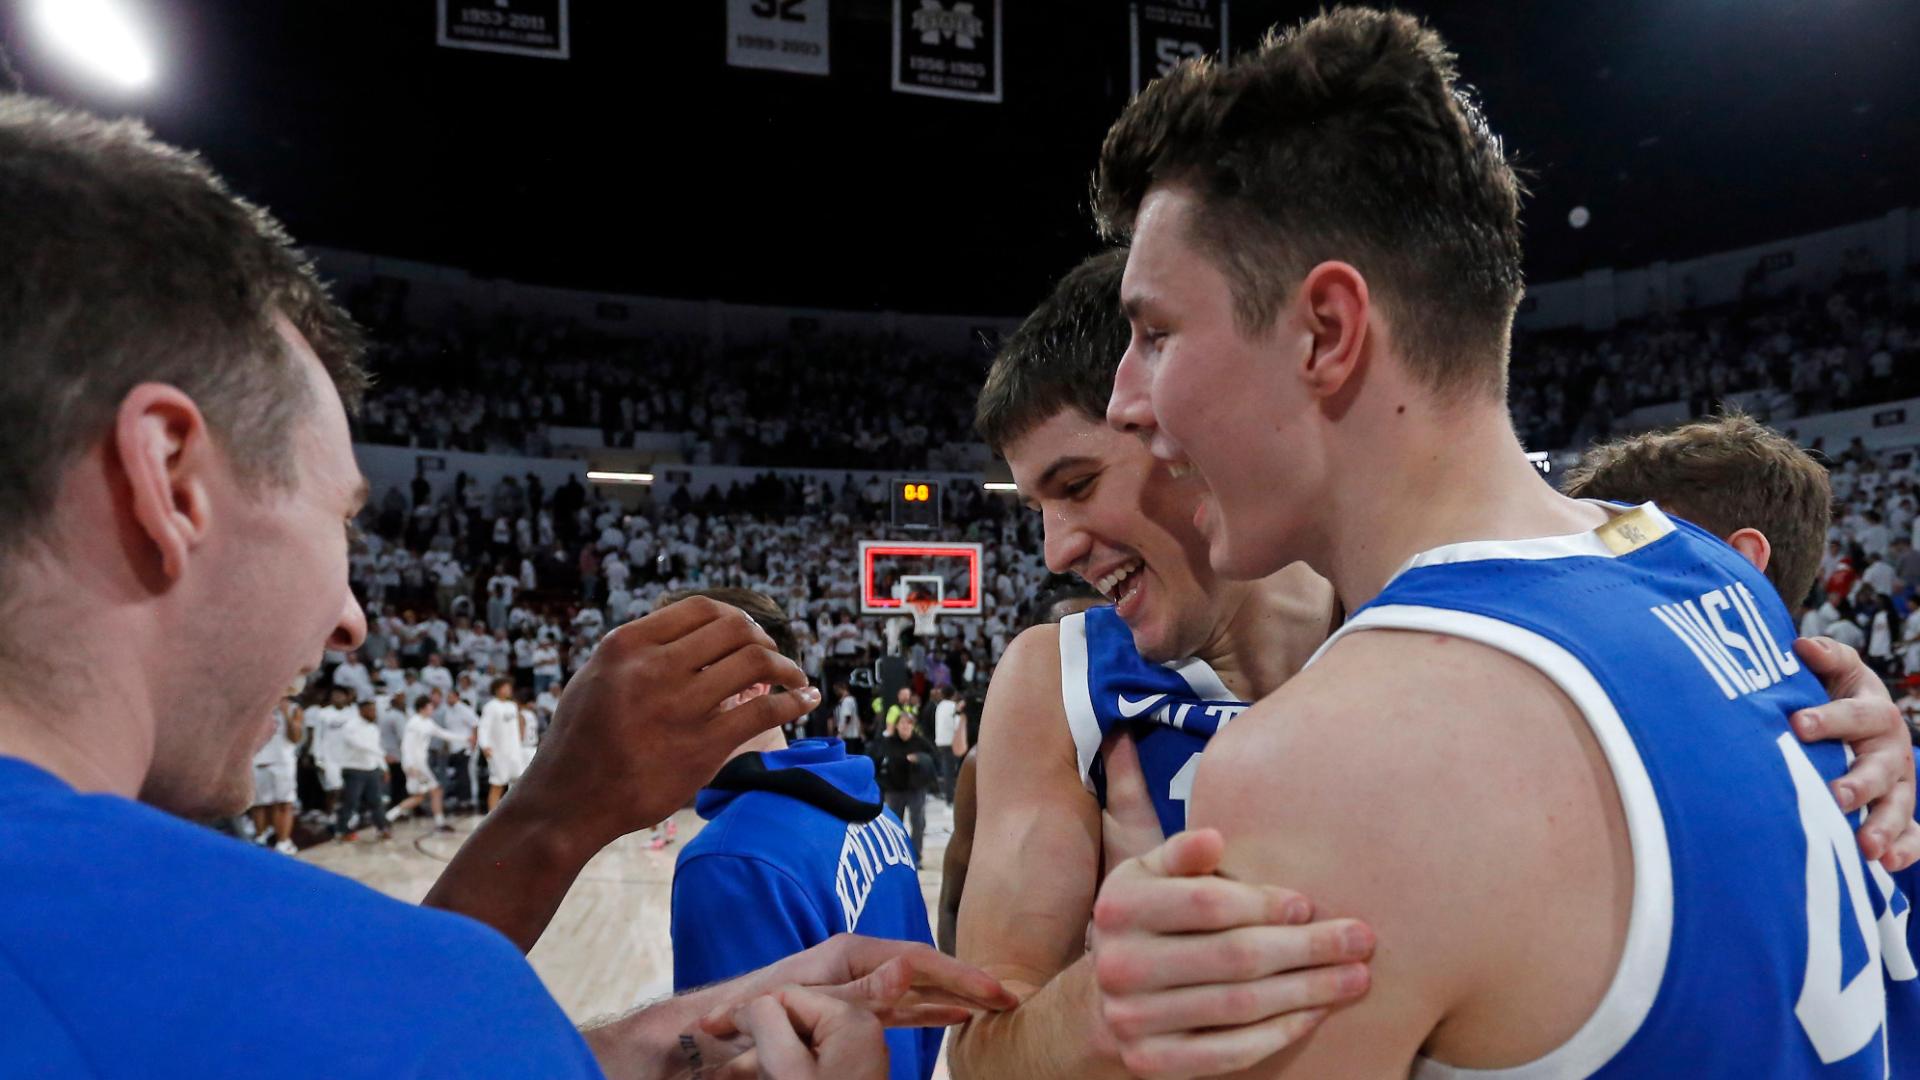 Reed Sheppard wins it for Kentucky in wild finish vs. Mississippi State